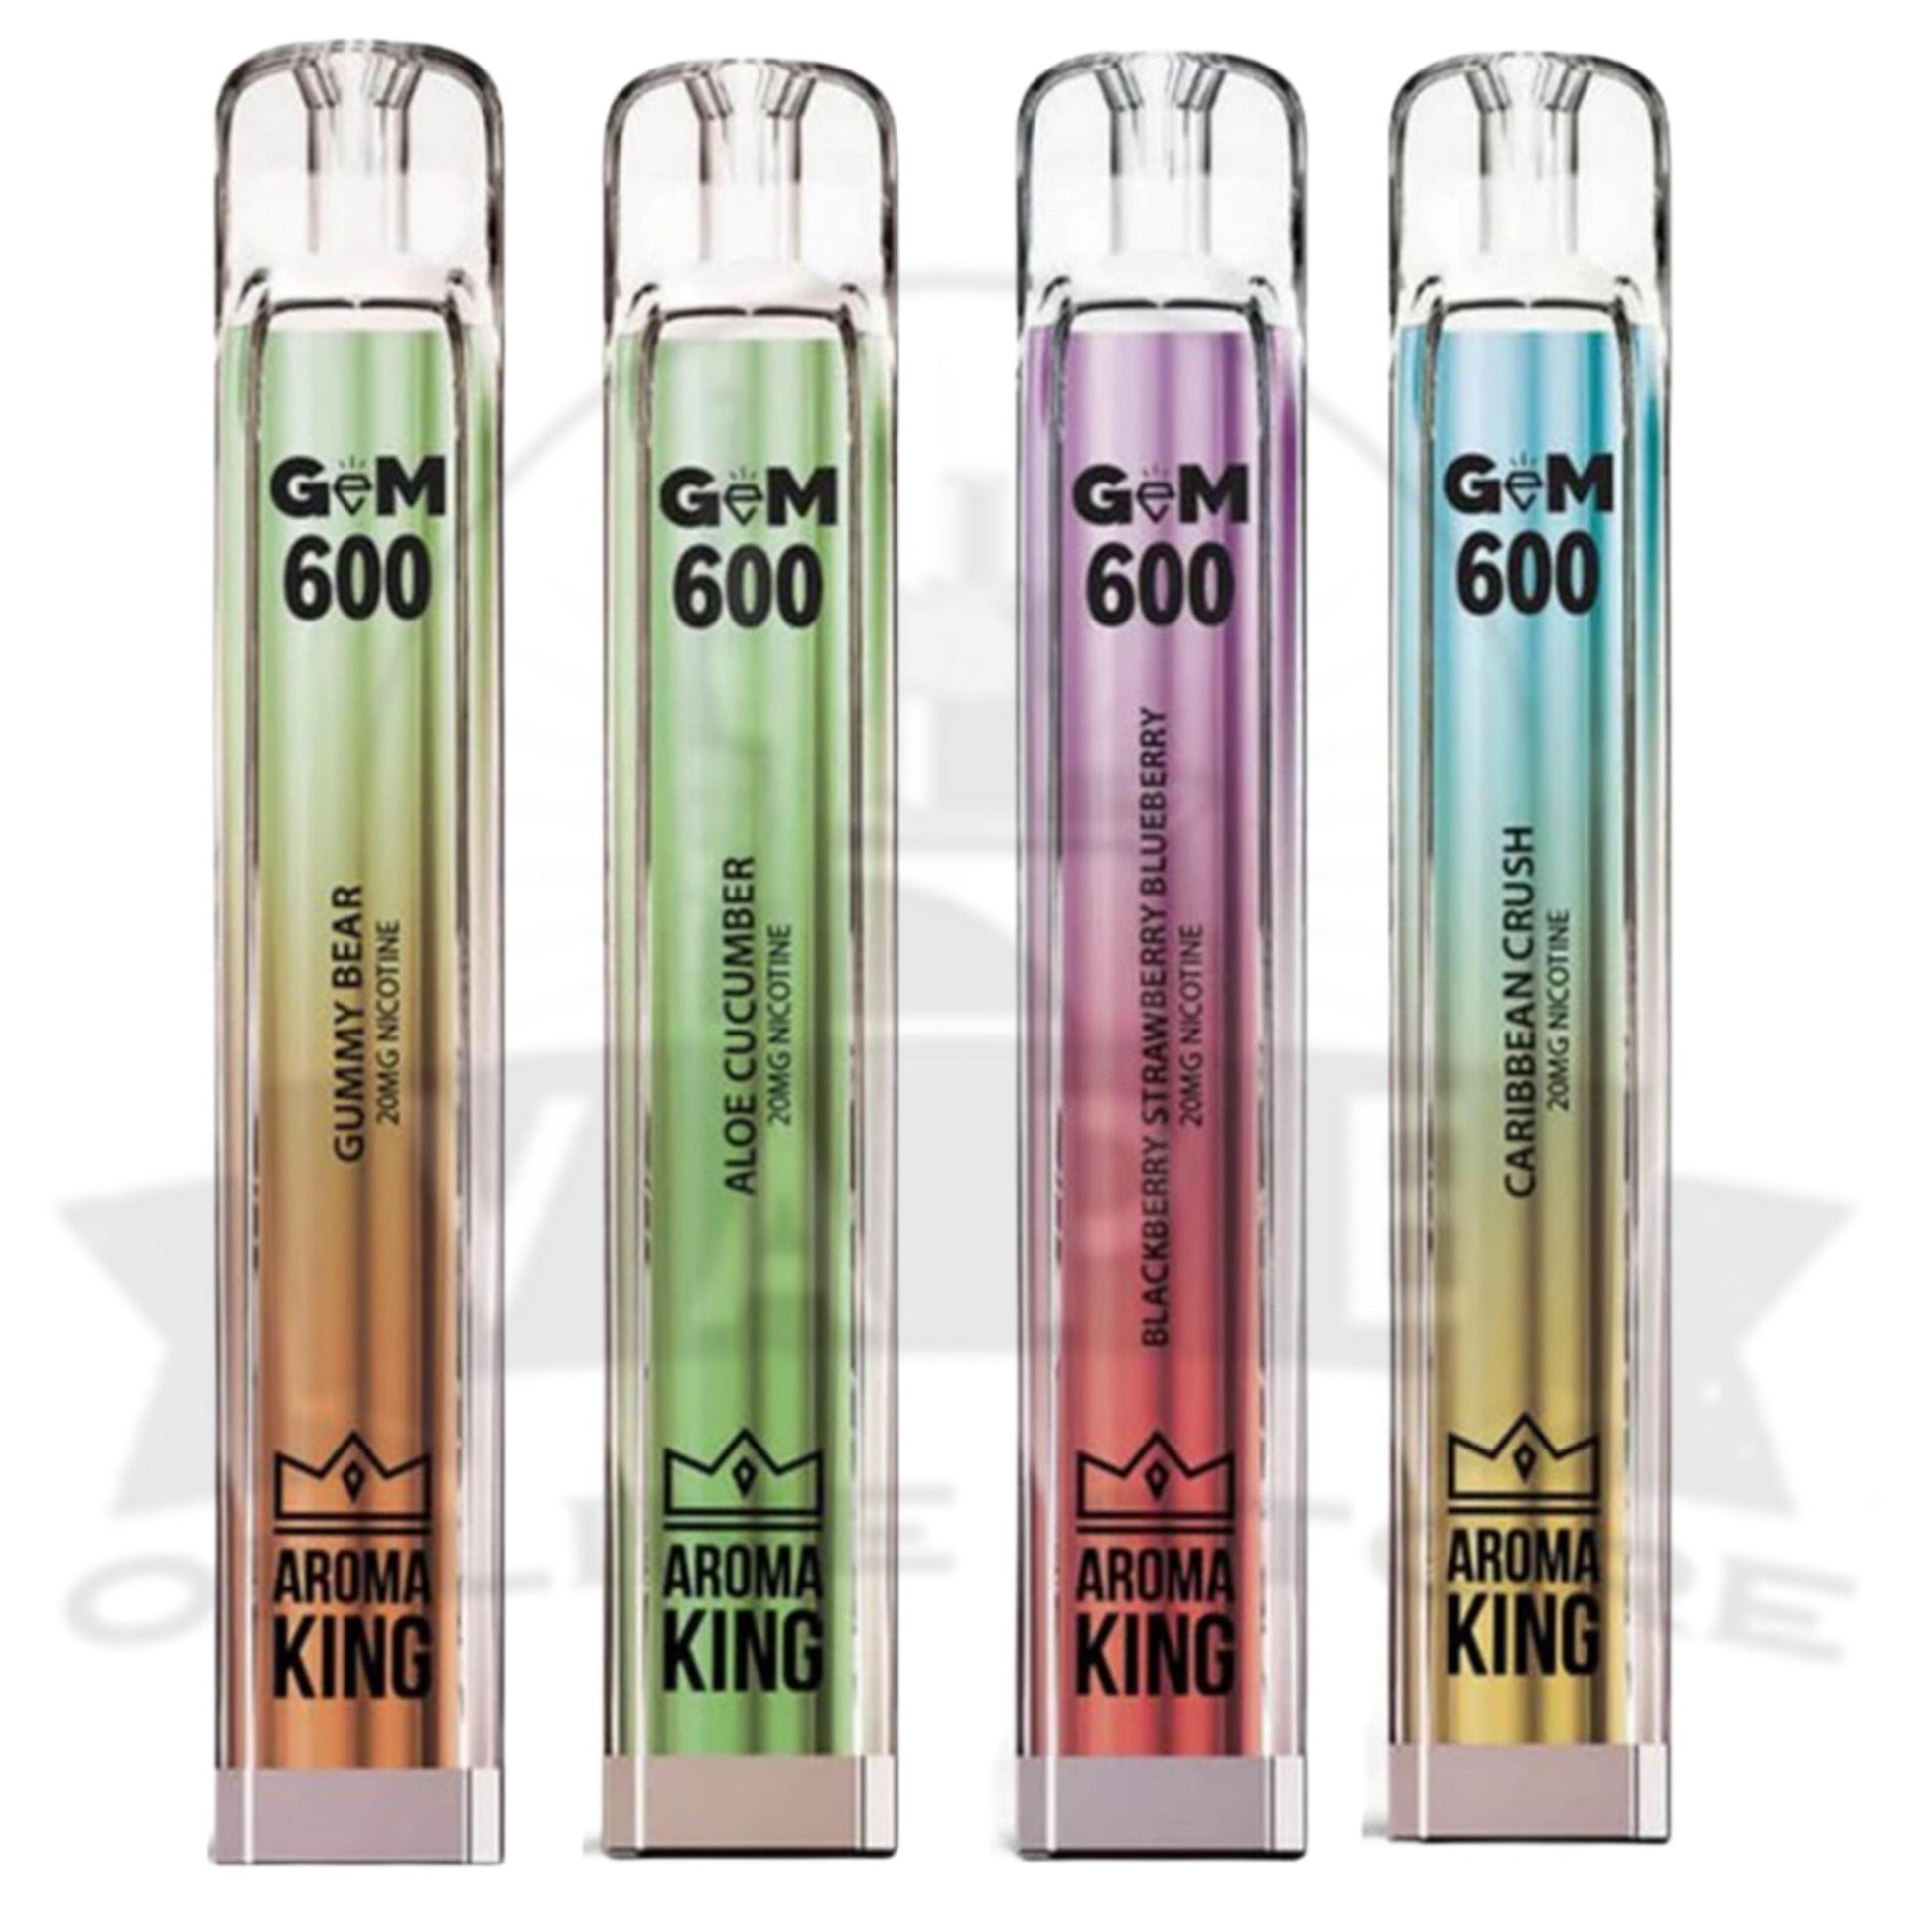 Aroma King Gem 600 Puffs | Free Next Day Delivery